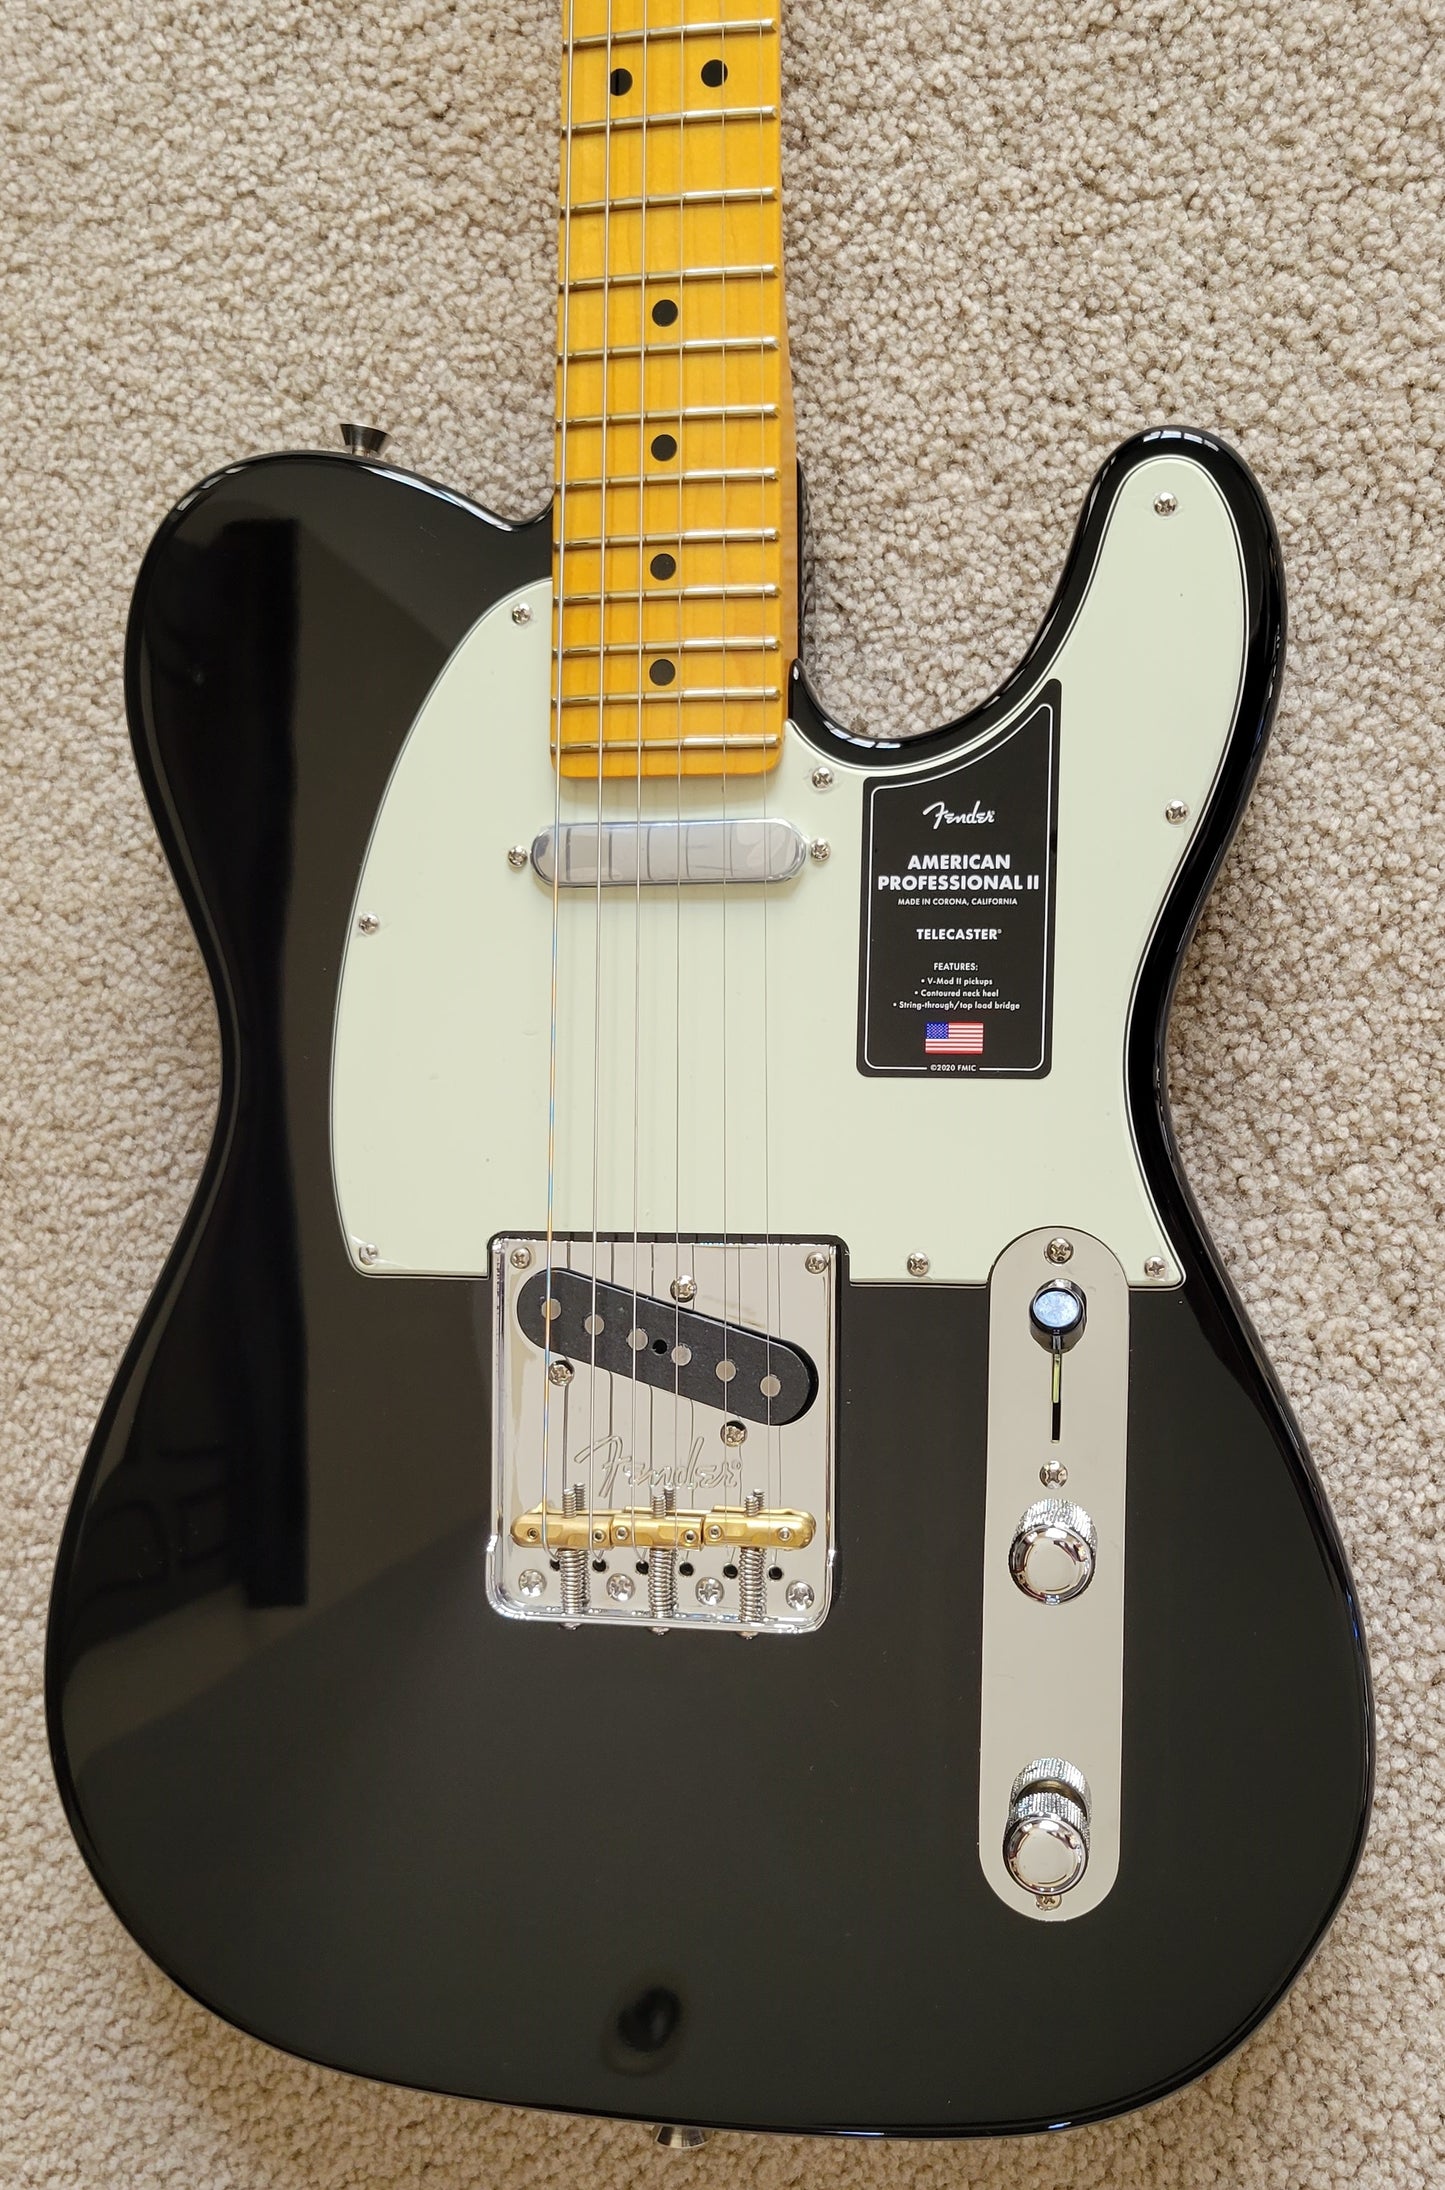 Fender American Professional II Telecaster Electric Guitar, Black, Deluxe Molded Hard Shell Case